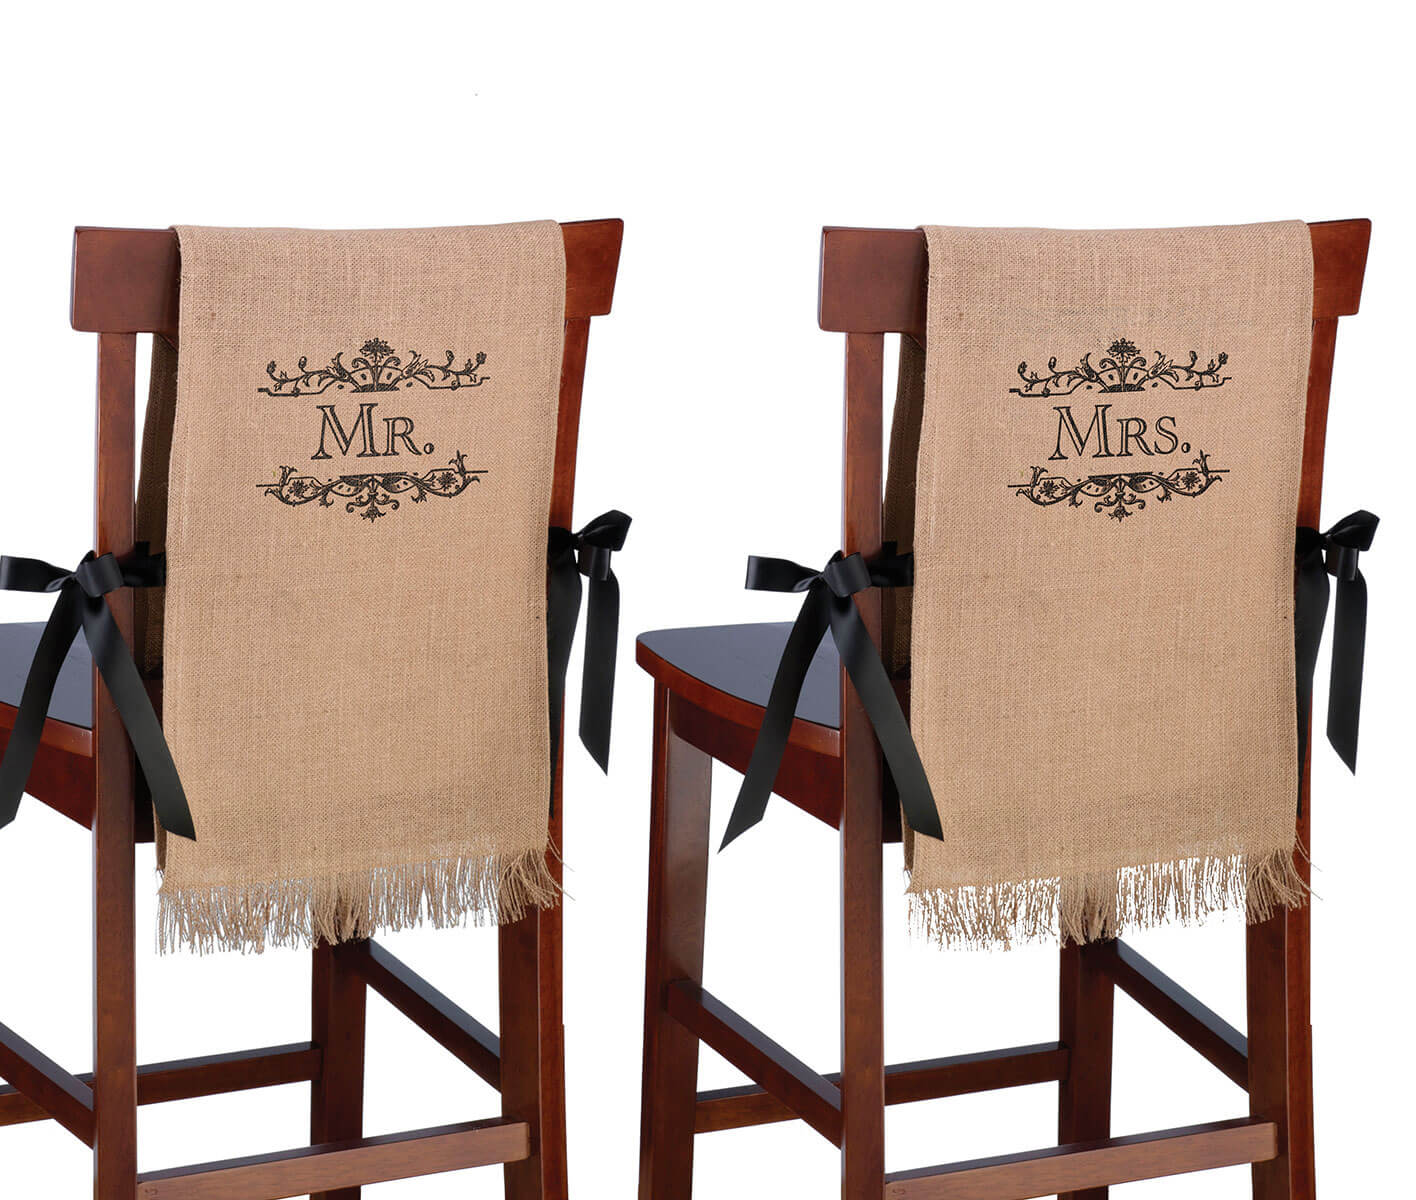 Mr. and Mrs. Rustic Burlap Chair Covers